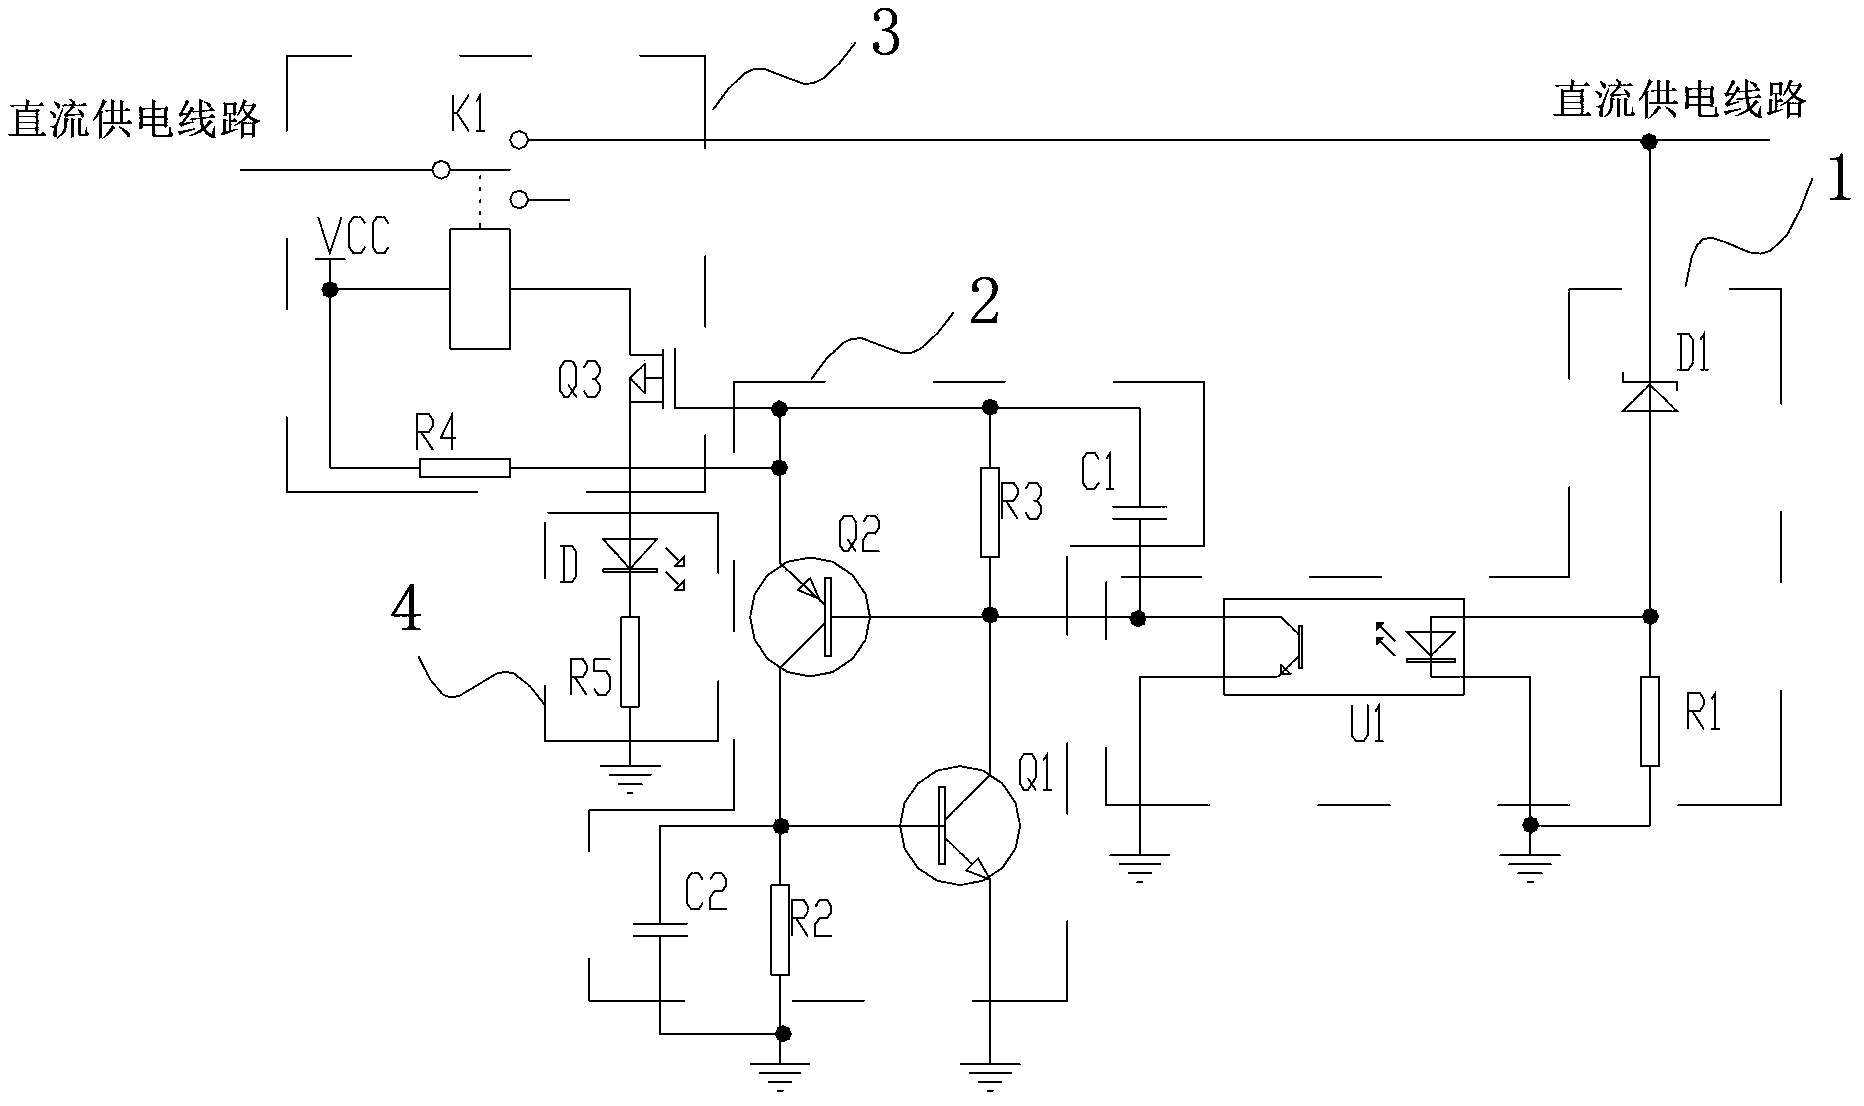 Overvoltage protection circuit and lamp